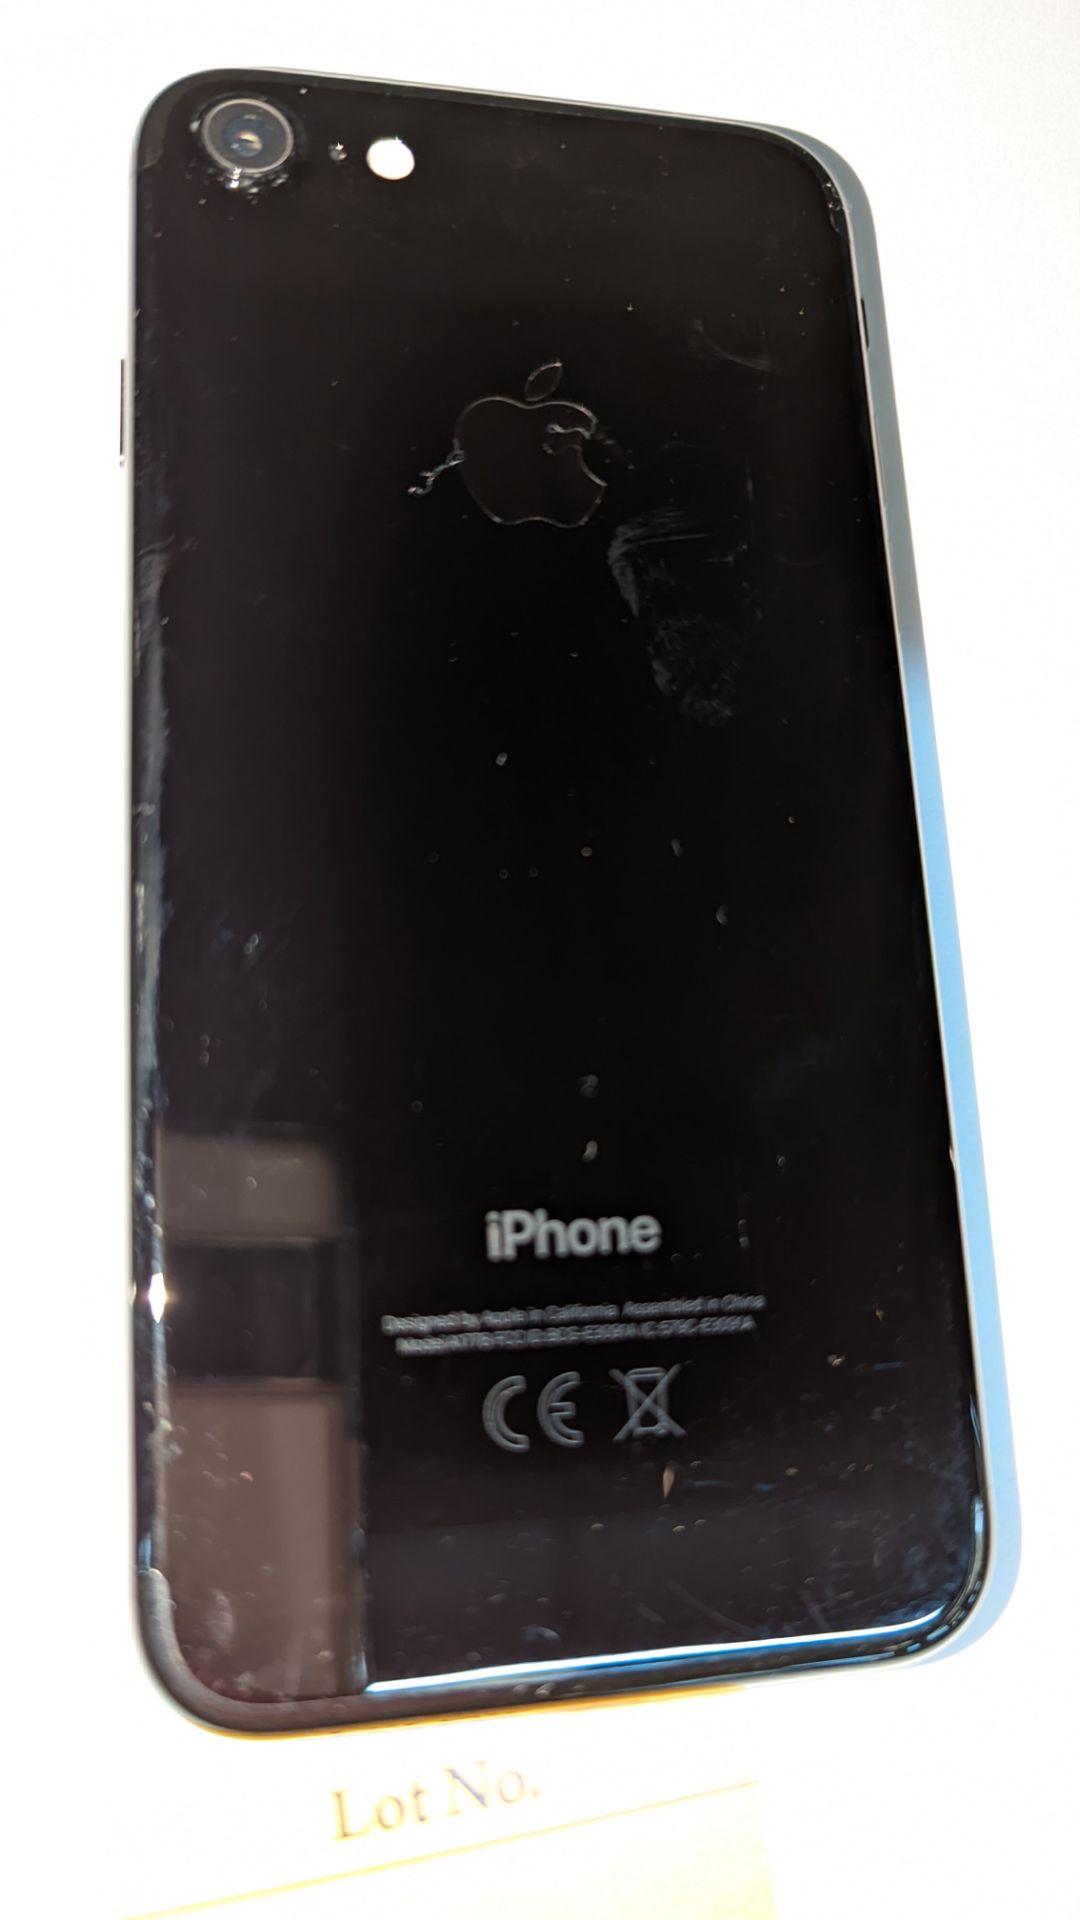 Apple iPhone 7, 32GB capacity, model A1778. No ancillaries or accessories - Image 9 of 13